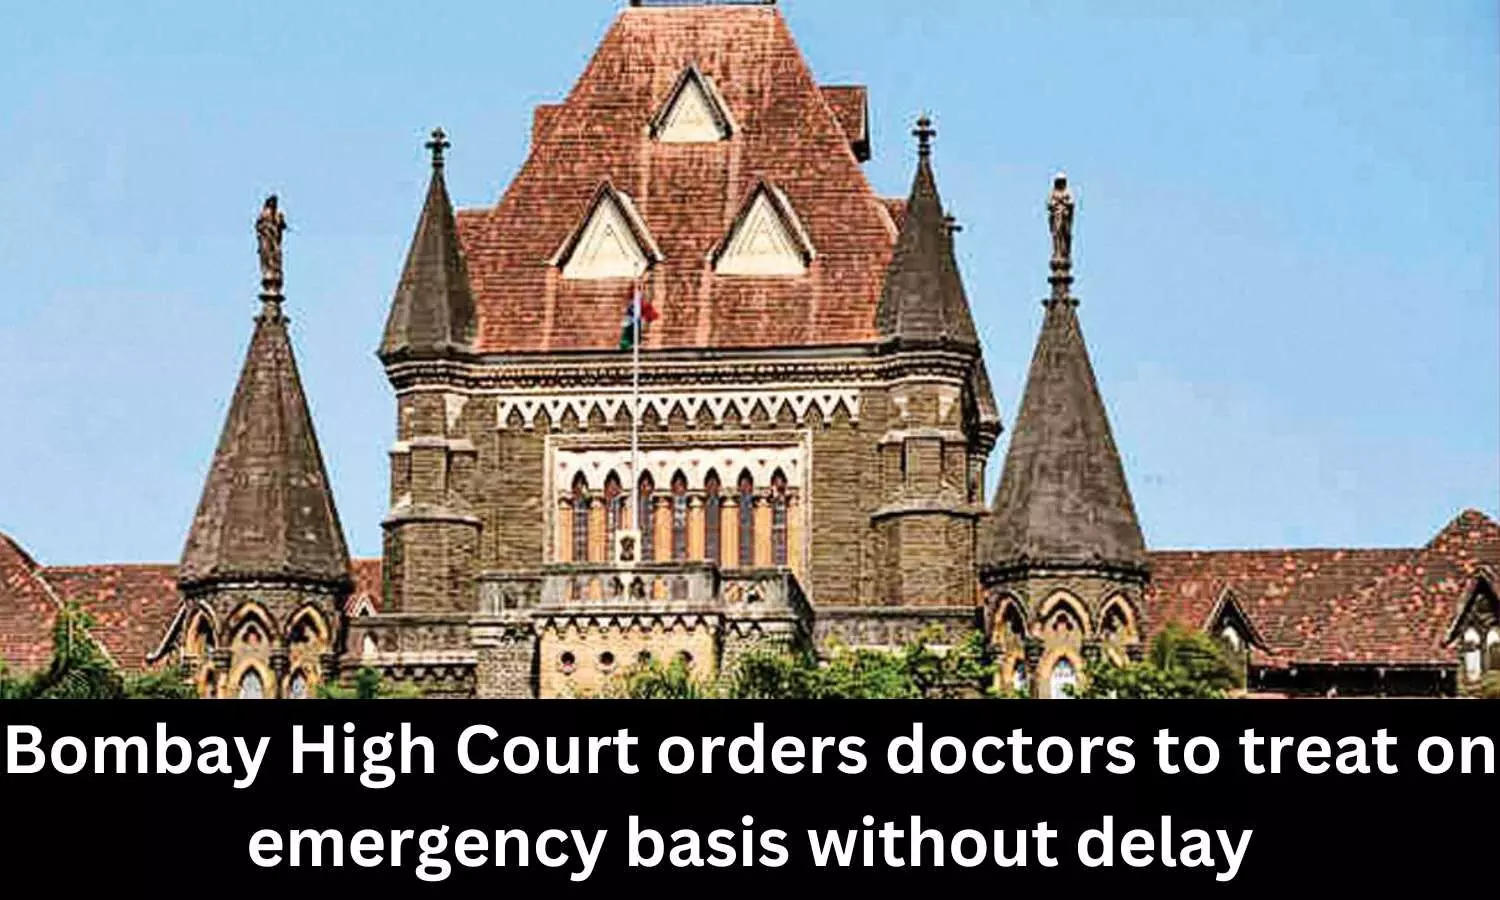 Bombay High Court orders doctors to treat on emergency basis without delay